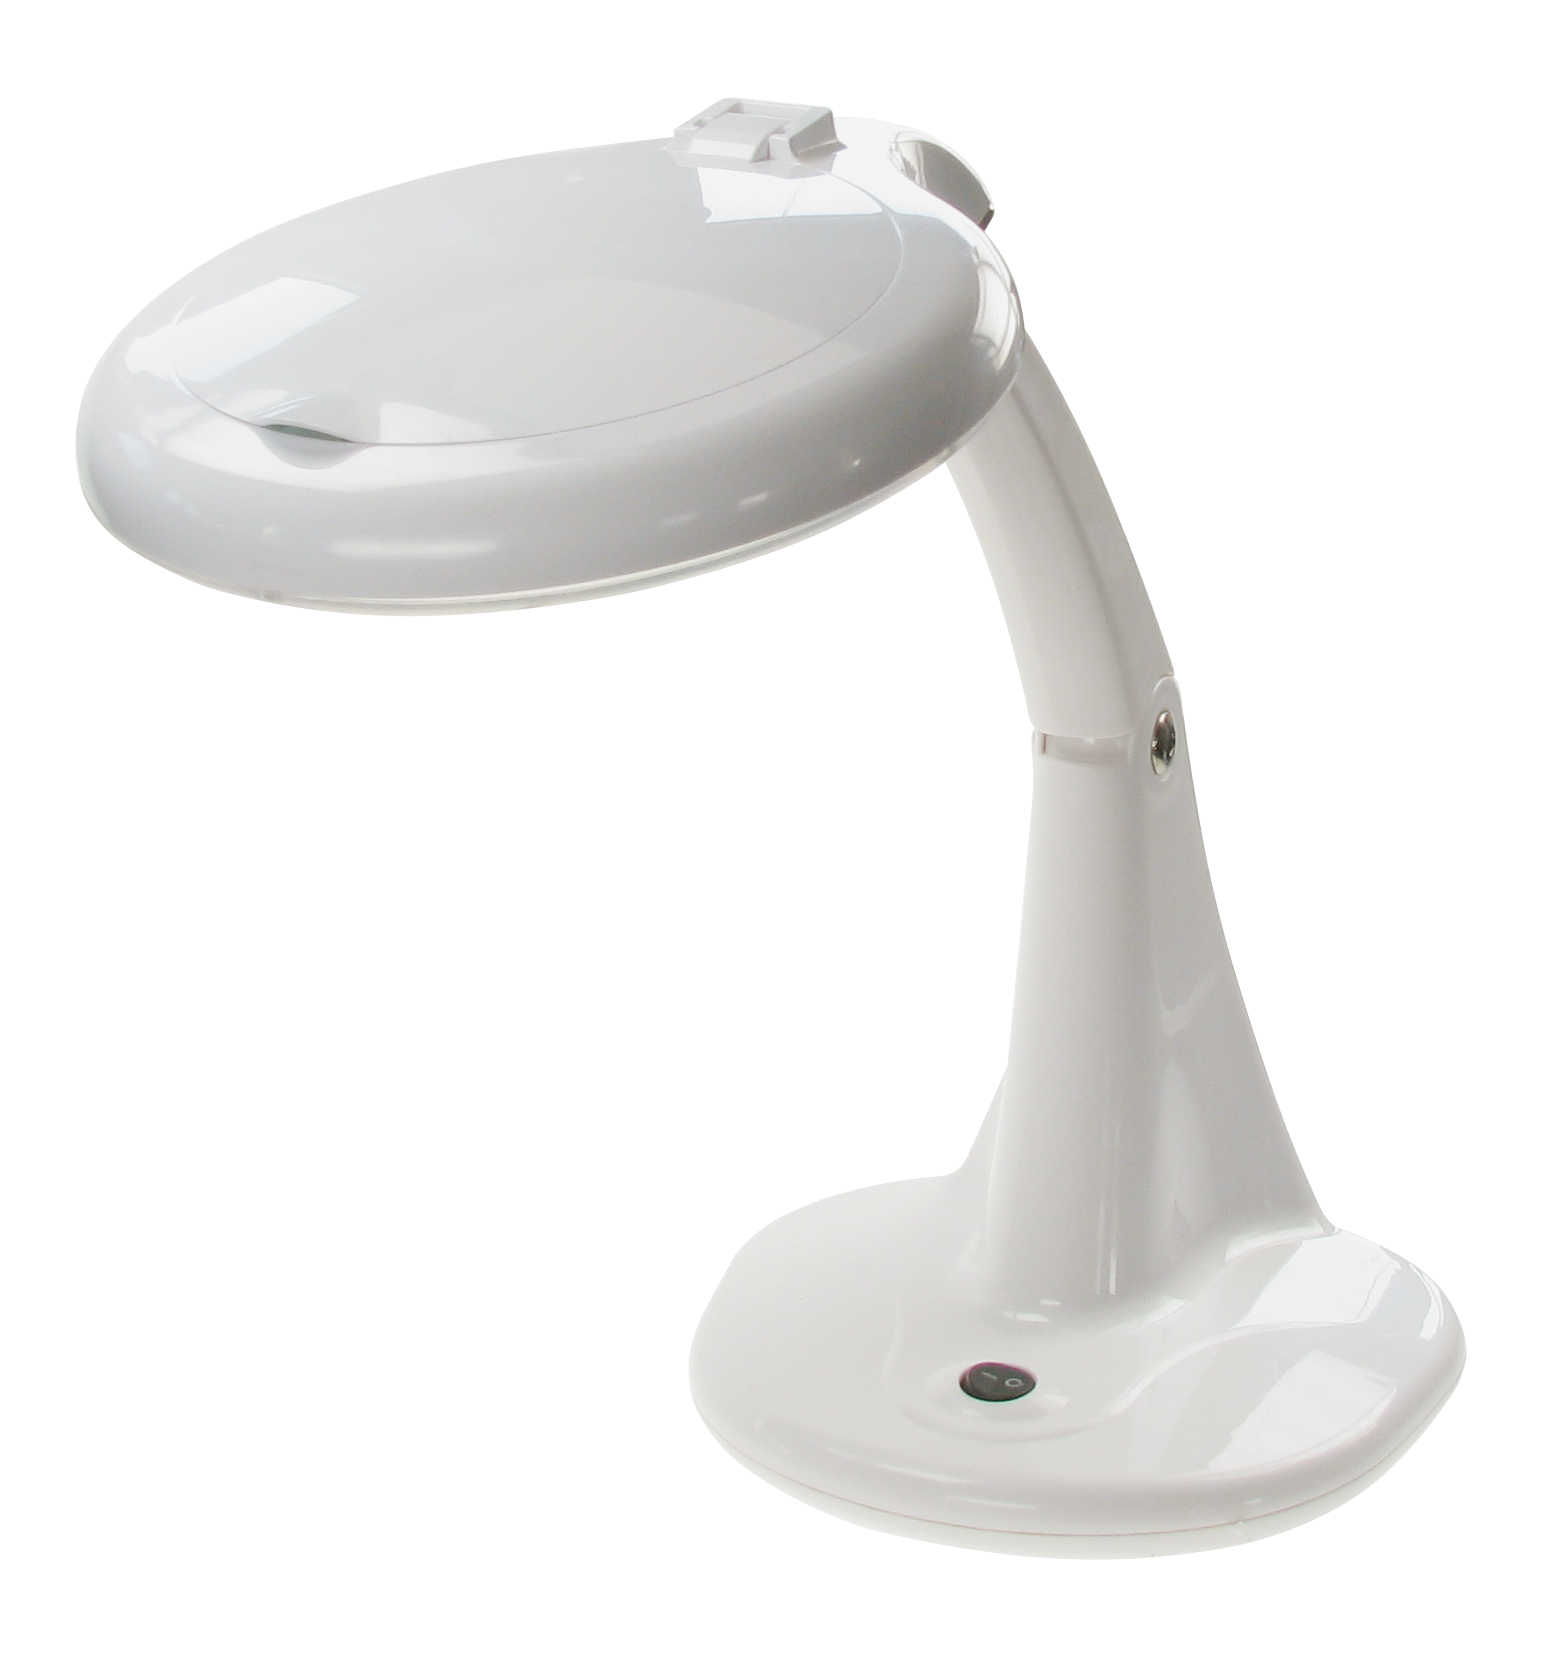 Table magnifier with light